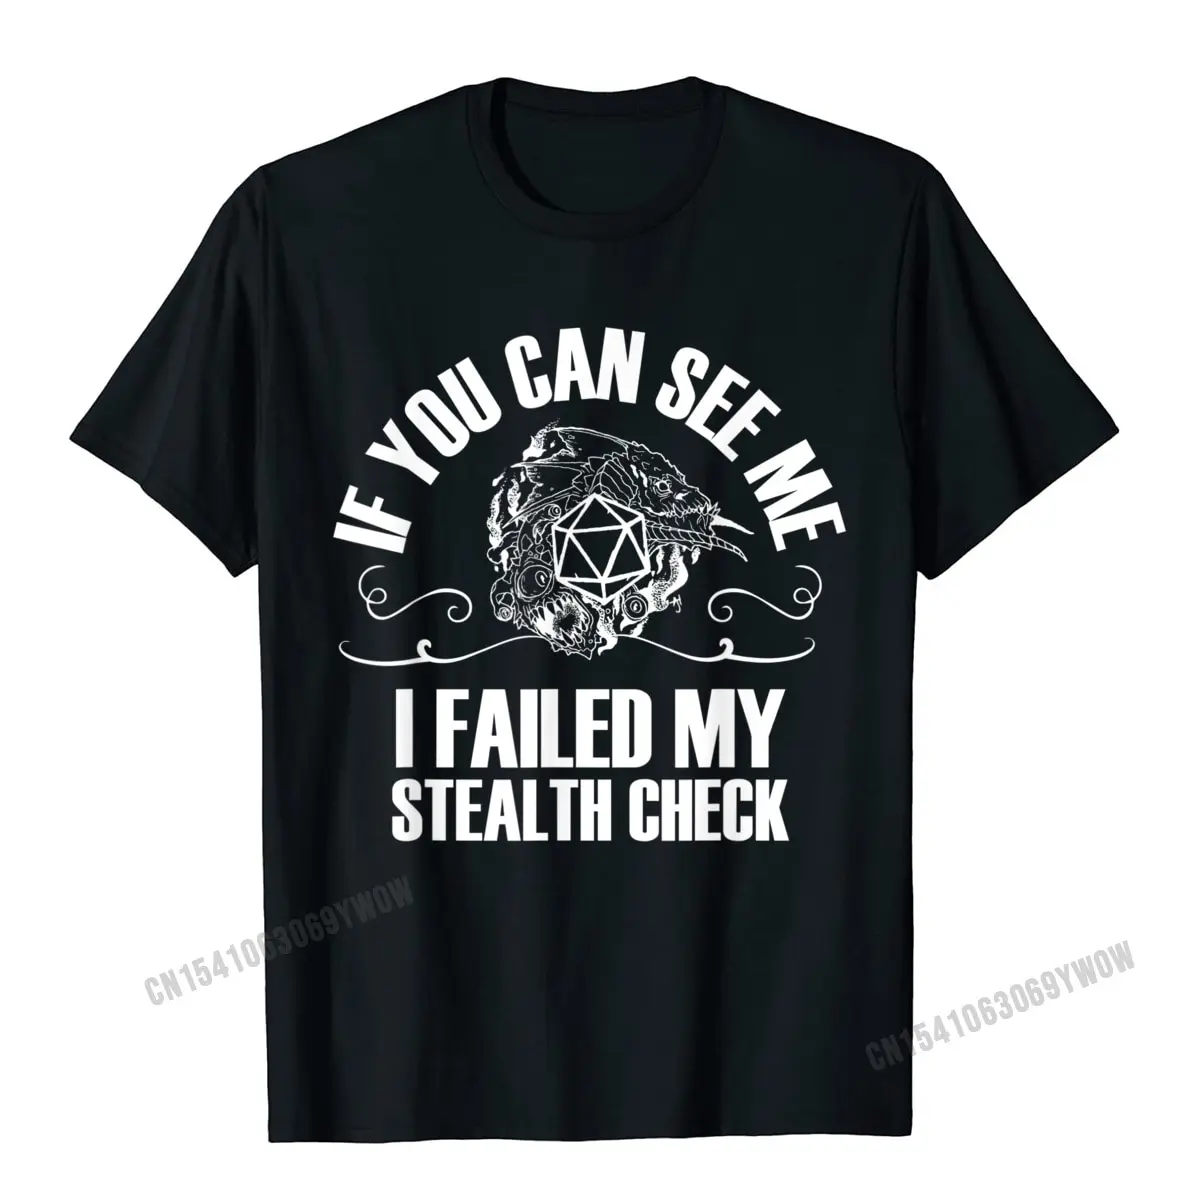 

If You Can See Me I Failed My Stealth Check Funny Gaming T-Shirt Camisas Men Print Cotton Mens Tops T Shirt Design Cheap T Shirt